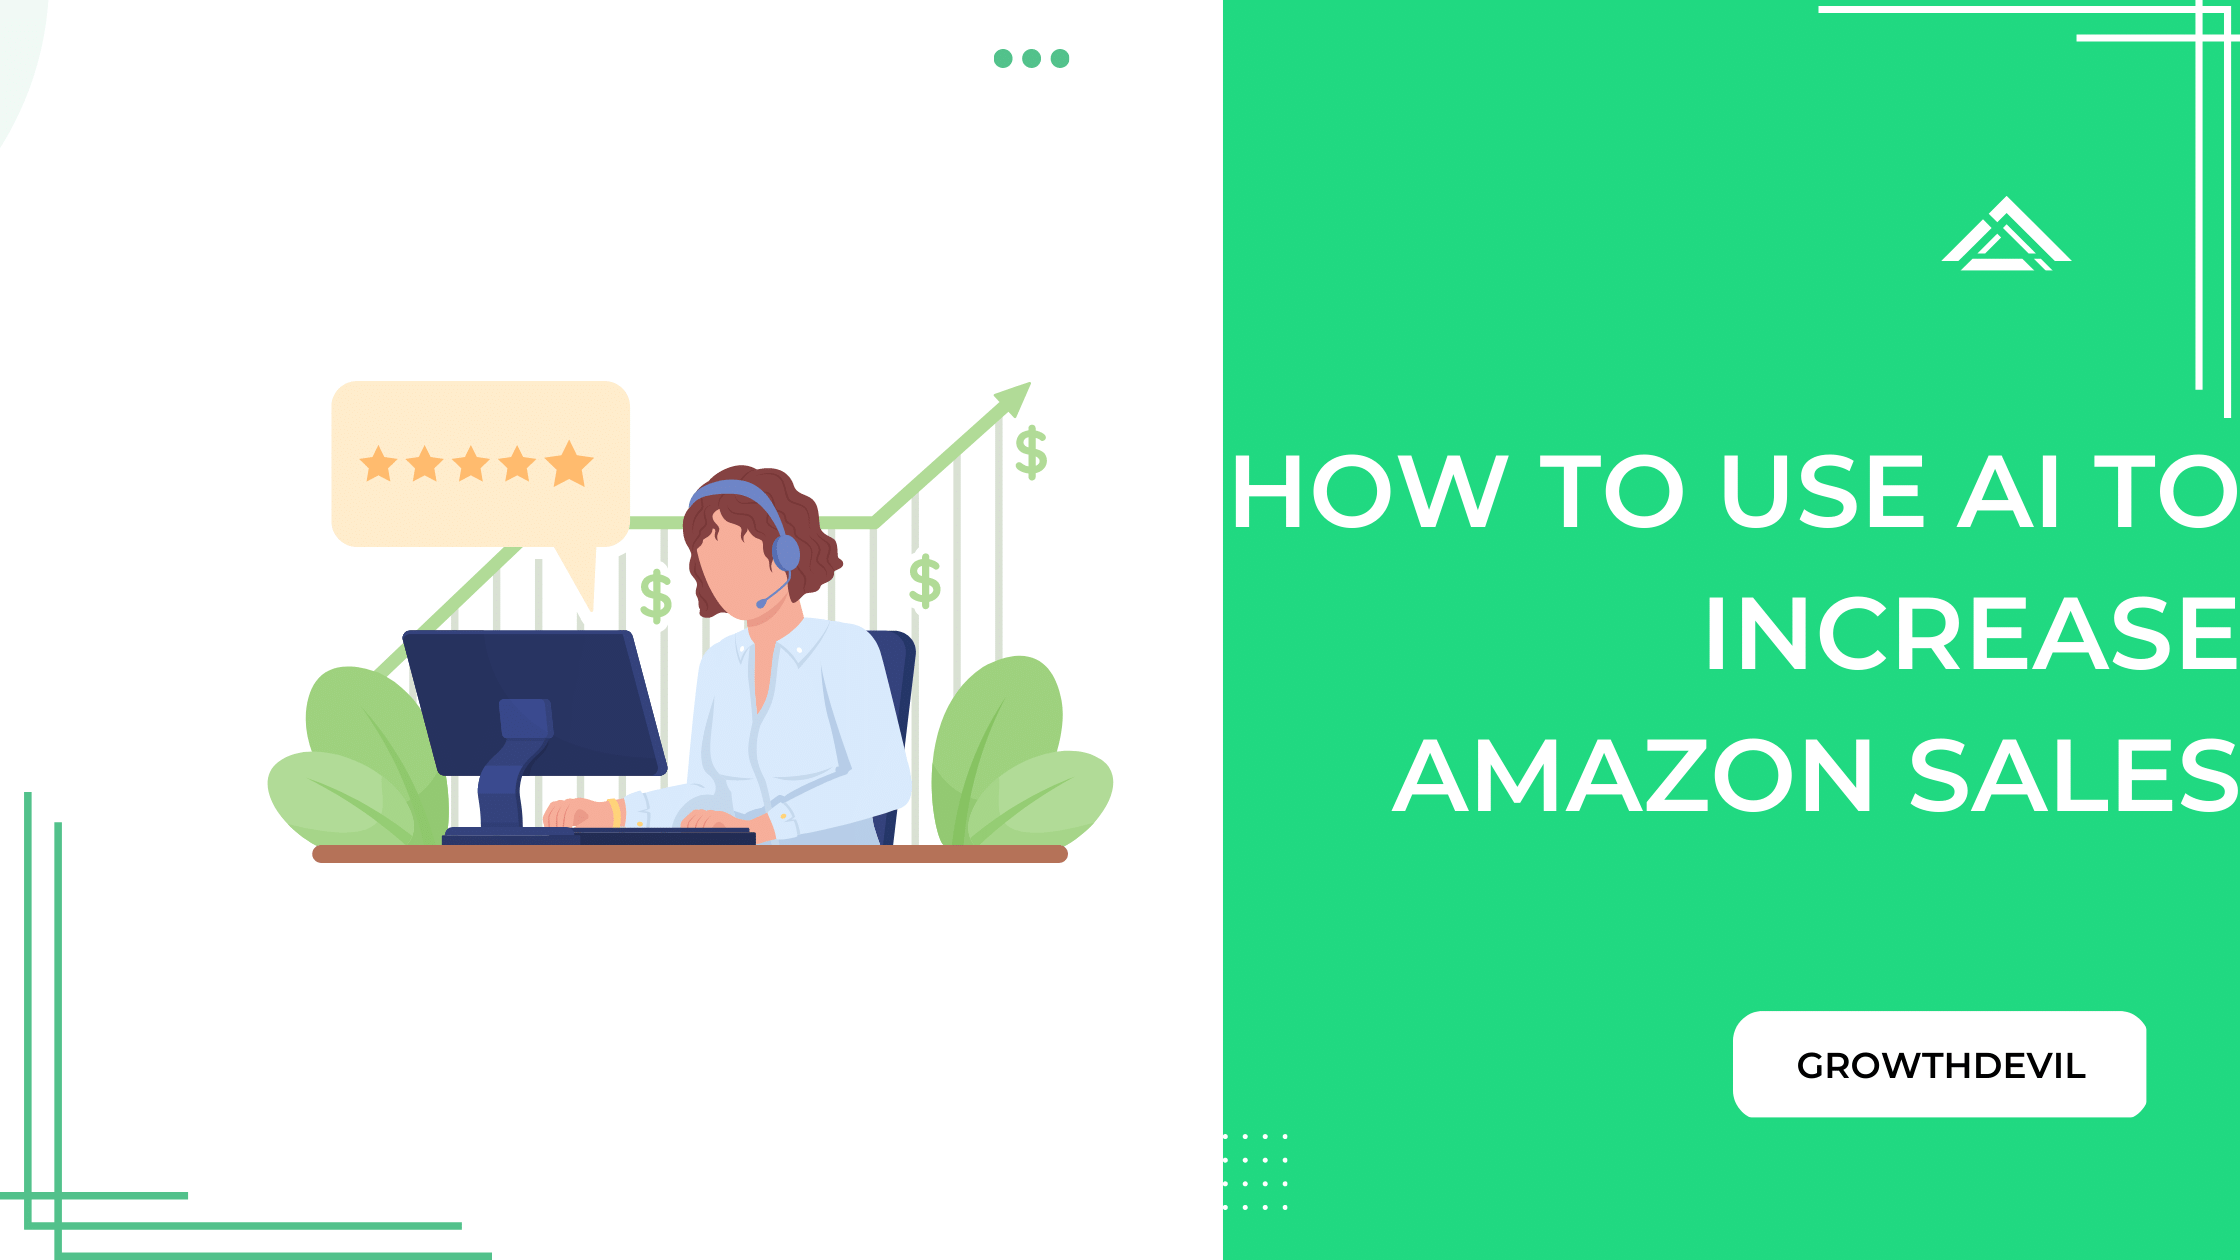 How To Use AI To Increase Amazon Sales - GrowthDevil